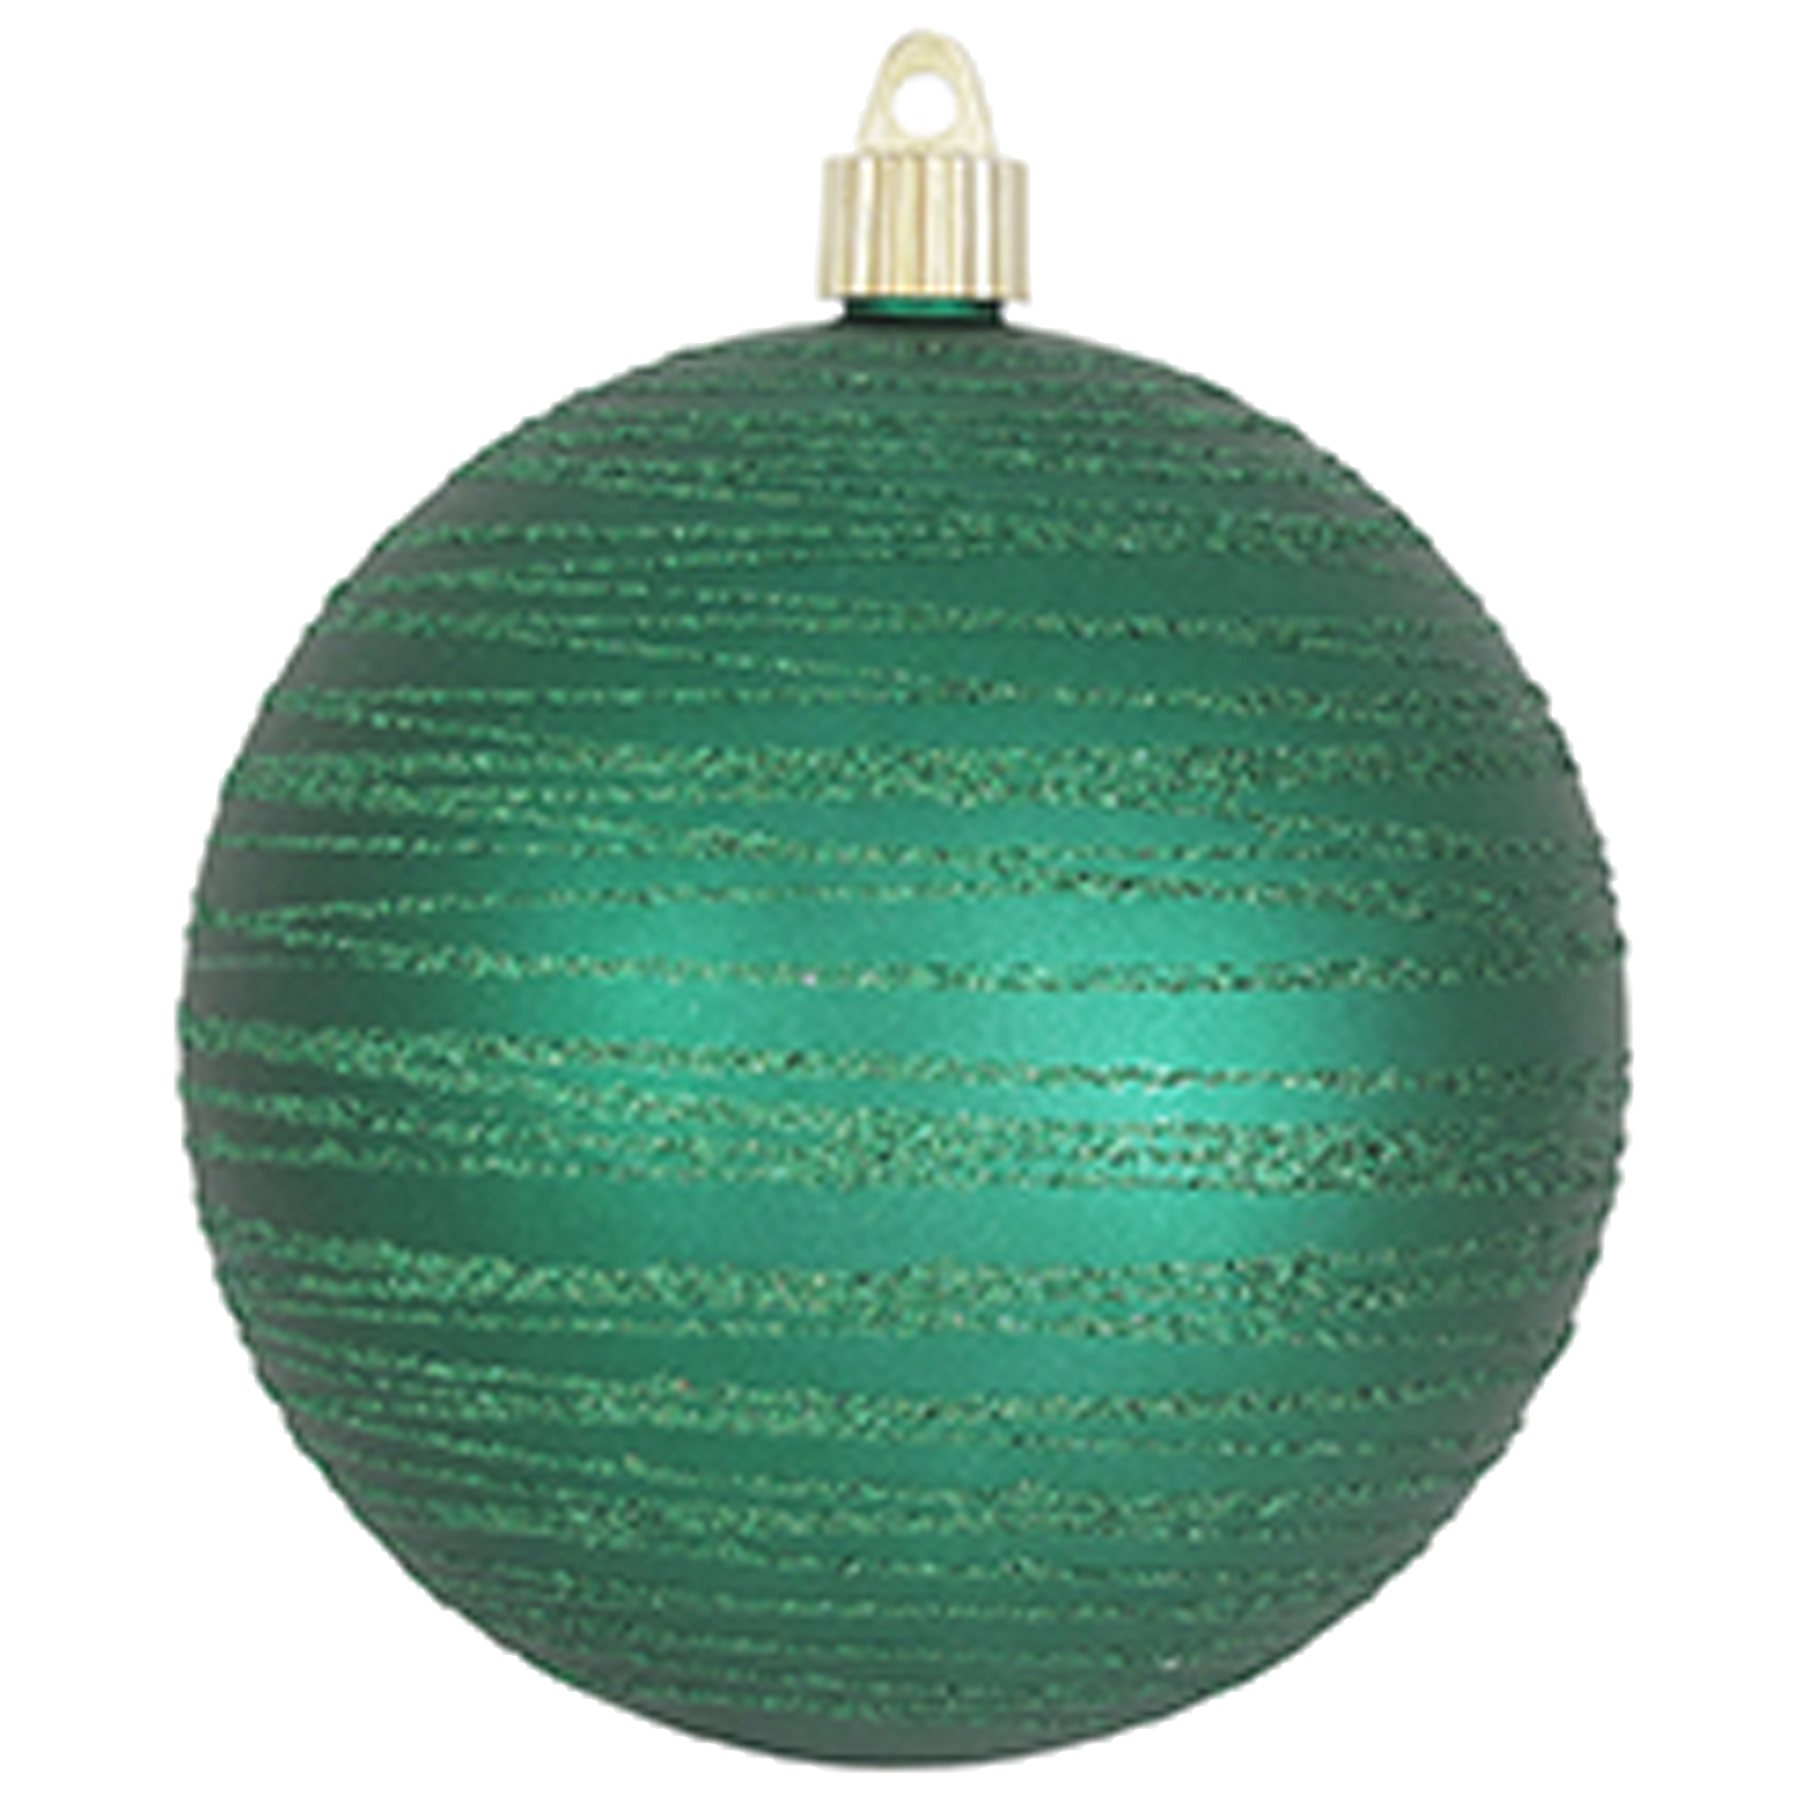 120MM Plastic Ball Ornaments: Candy Apple Green (Set of 2) [157133] 